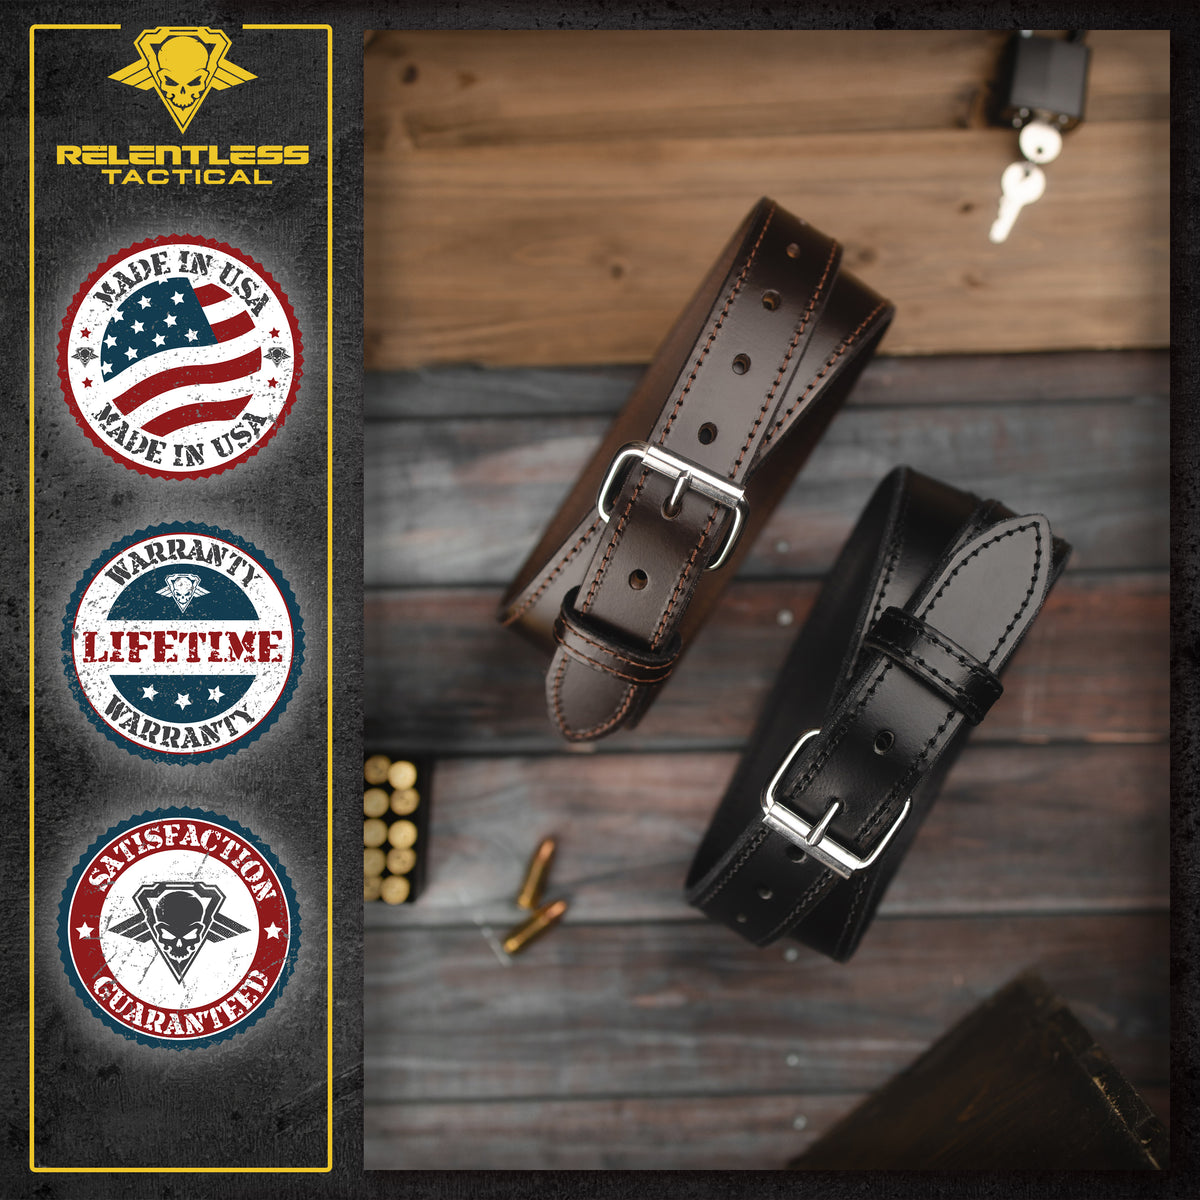  Winchester Concealed Carry Belt CCW, 14 Oz Full Grain